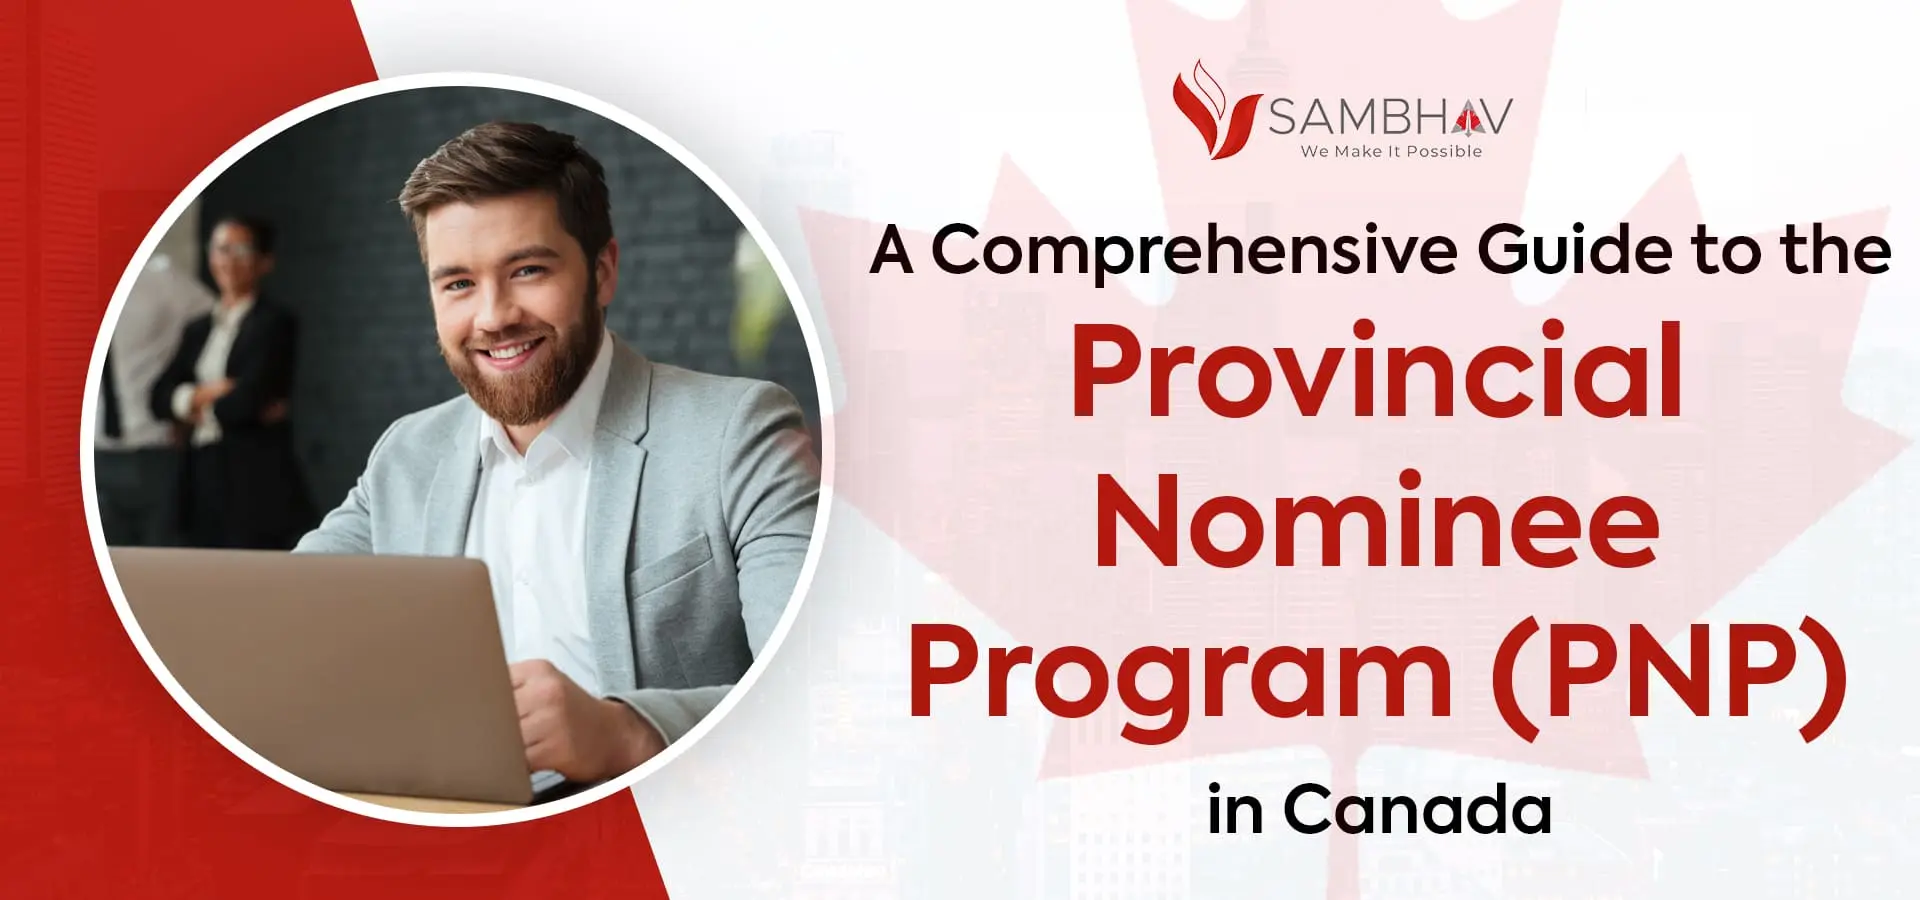 A Comprehensive Guide to the Provincial Nominee Program (PNP) in Canada